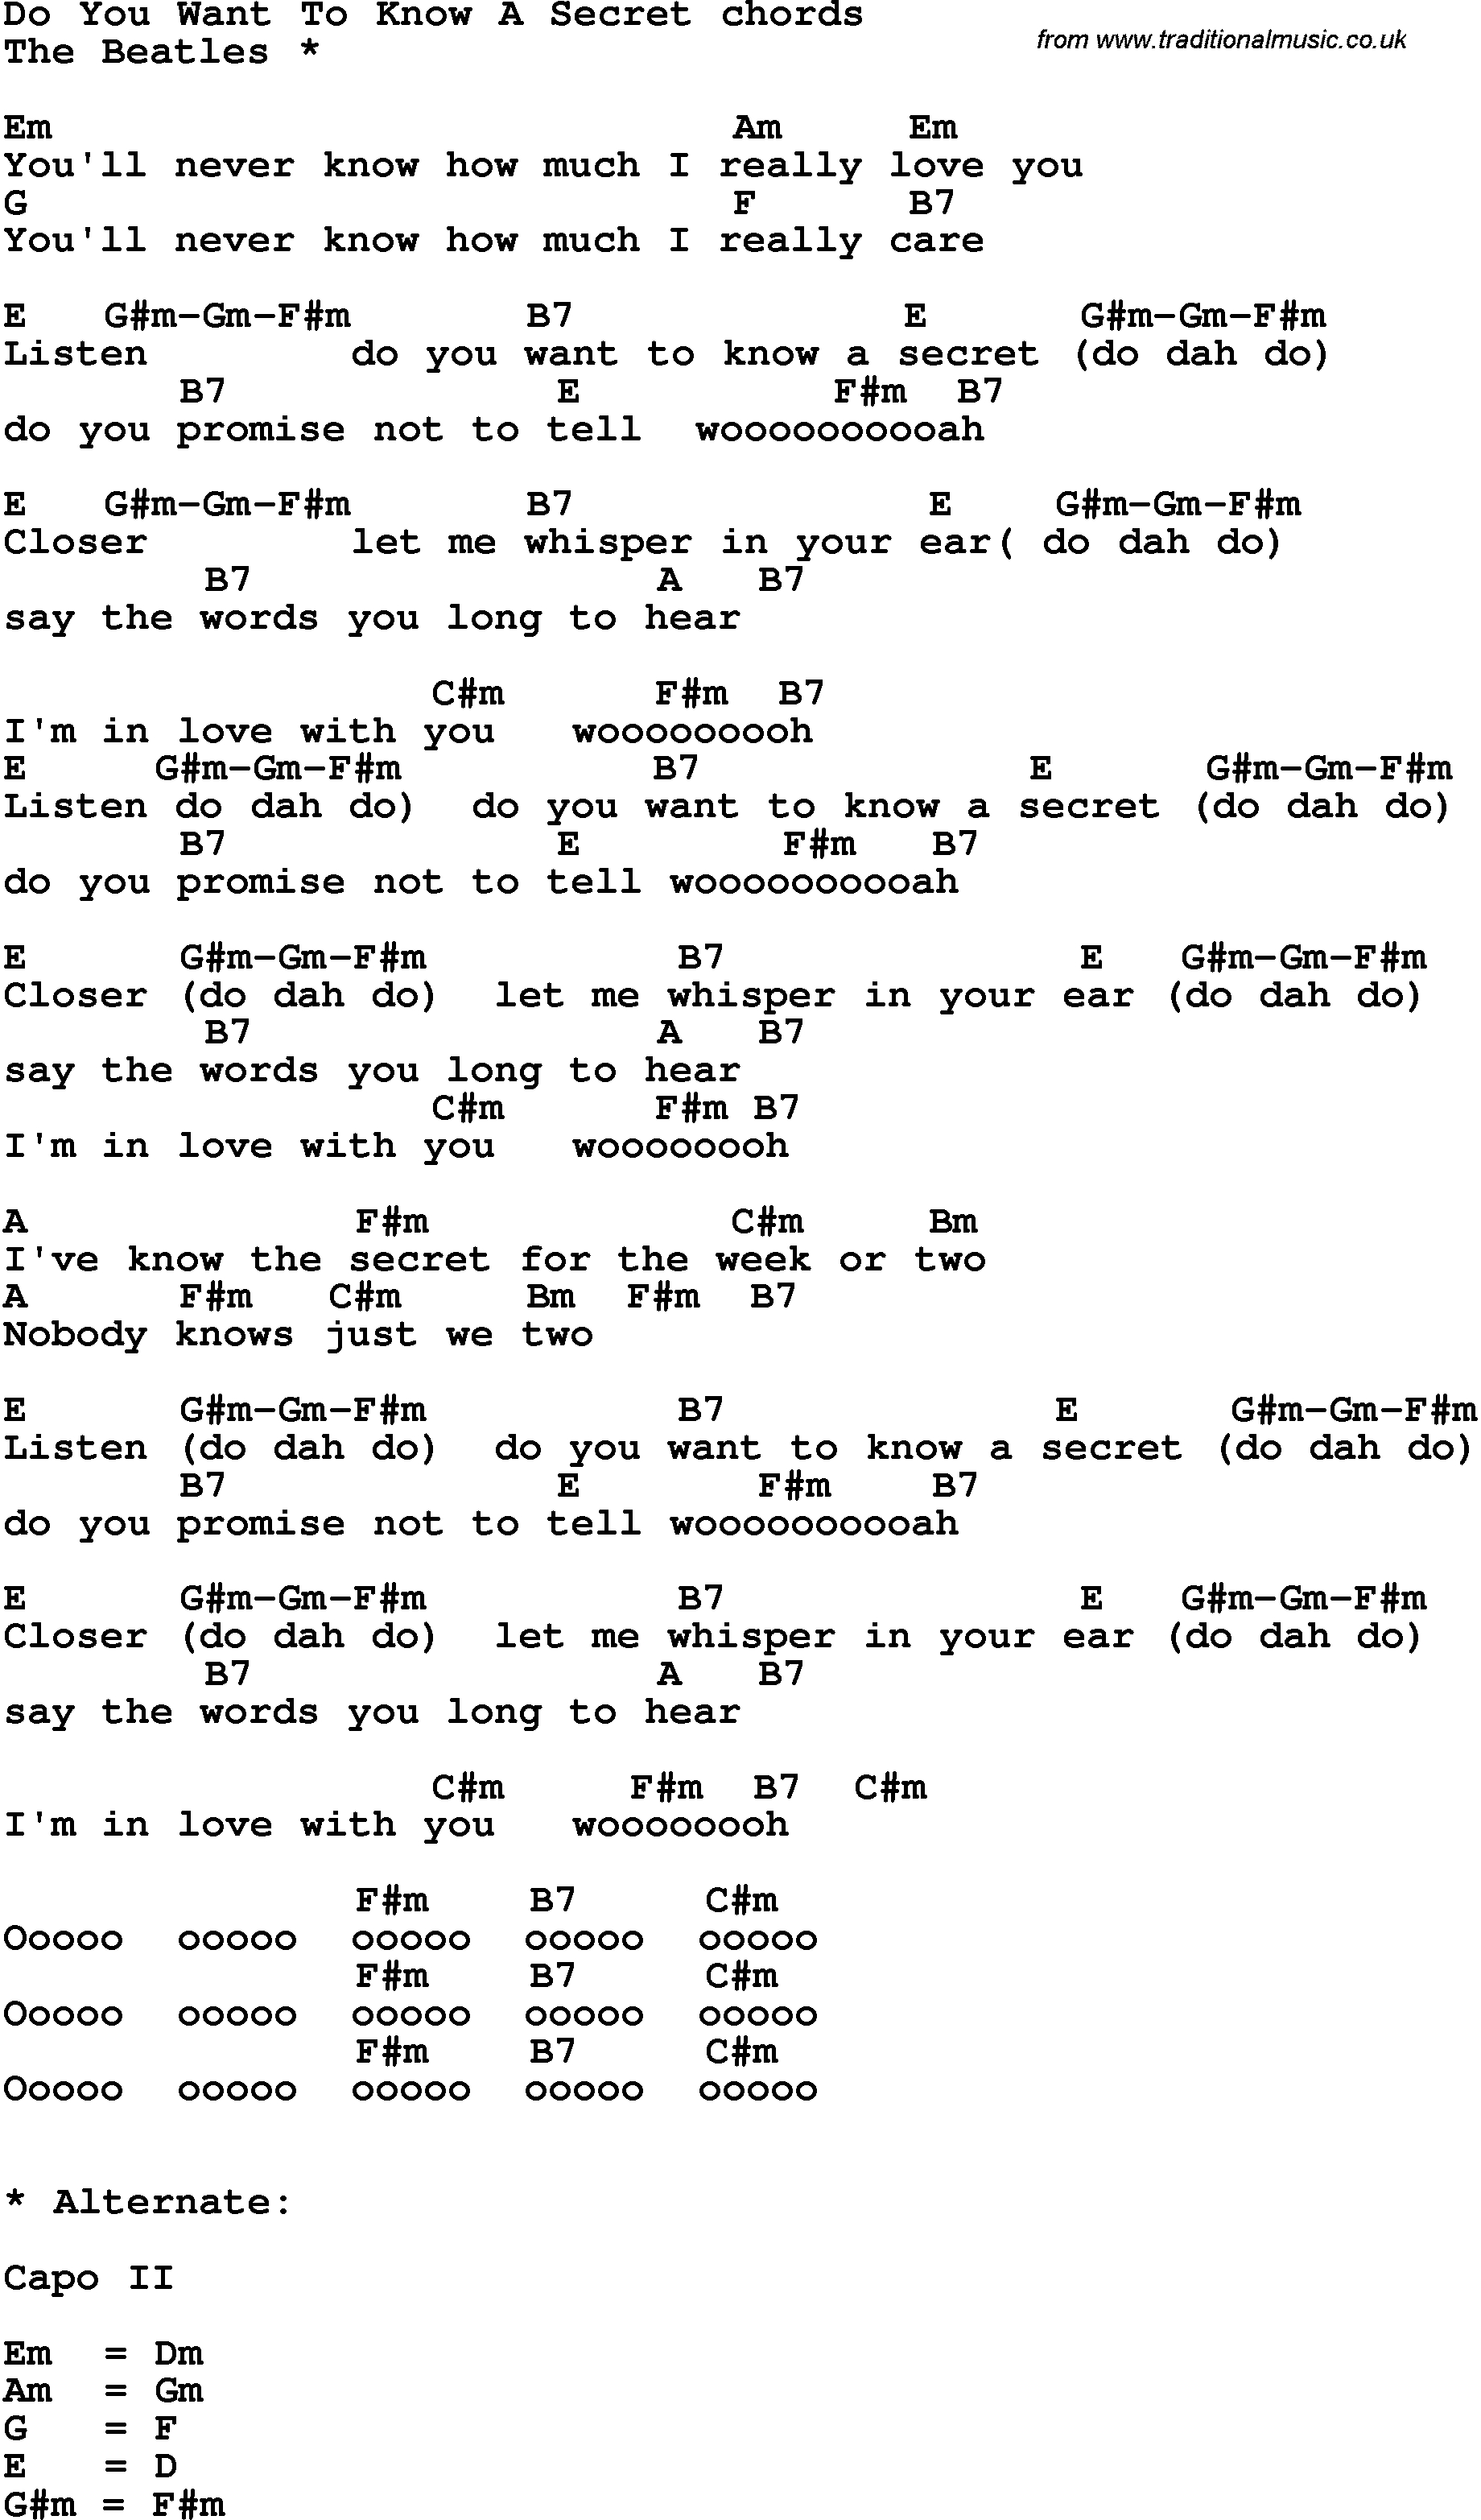 Do I Wanna Know Chords Song Lyrics With Guitar Chords For Do You Want To Know A Secret